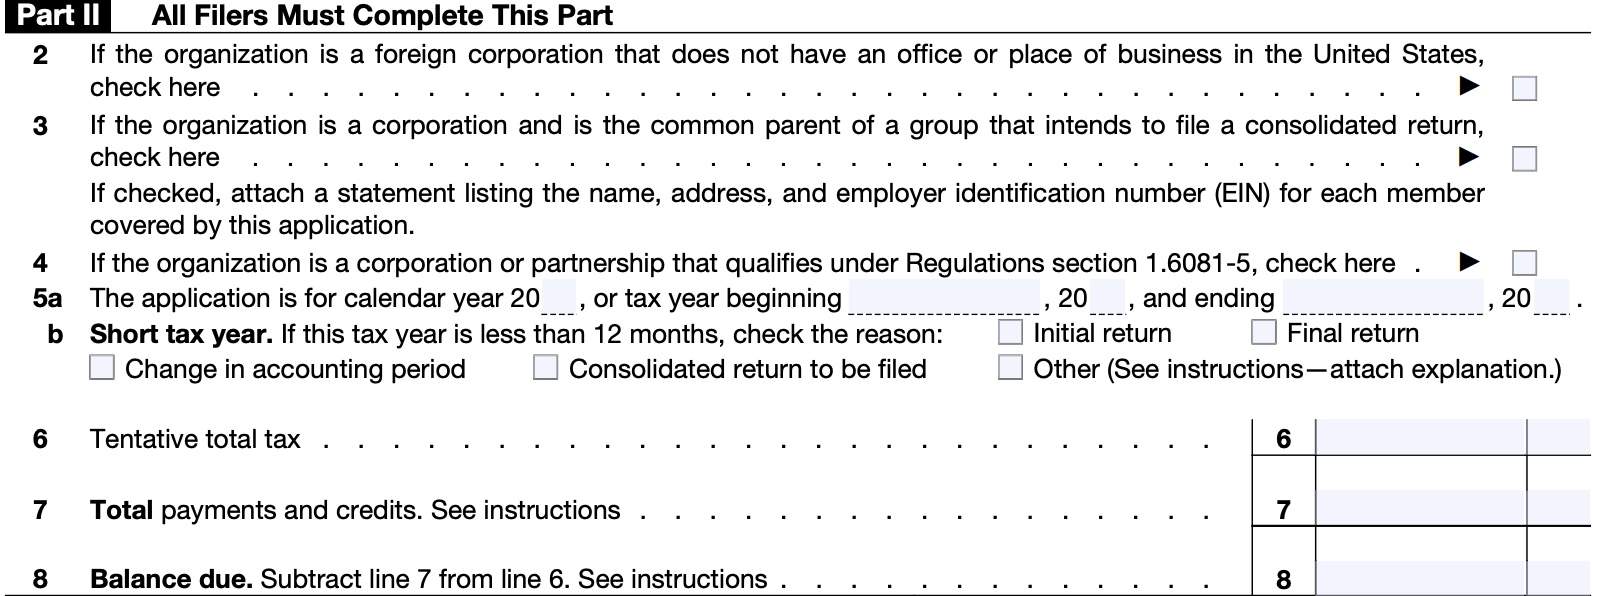 irs form 7004, part ii